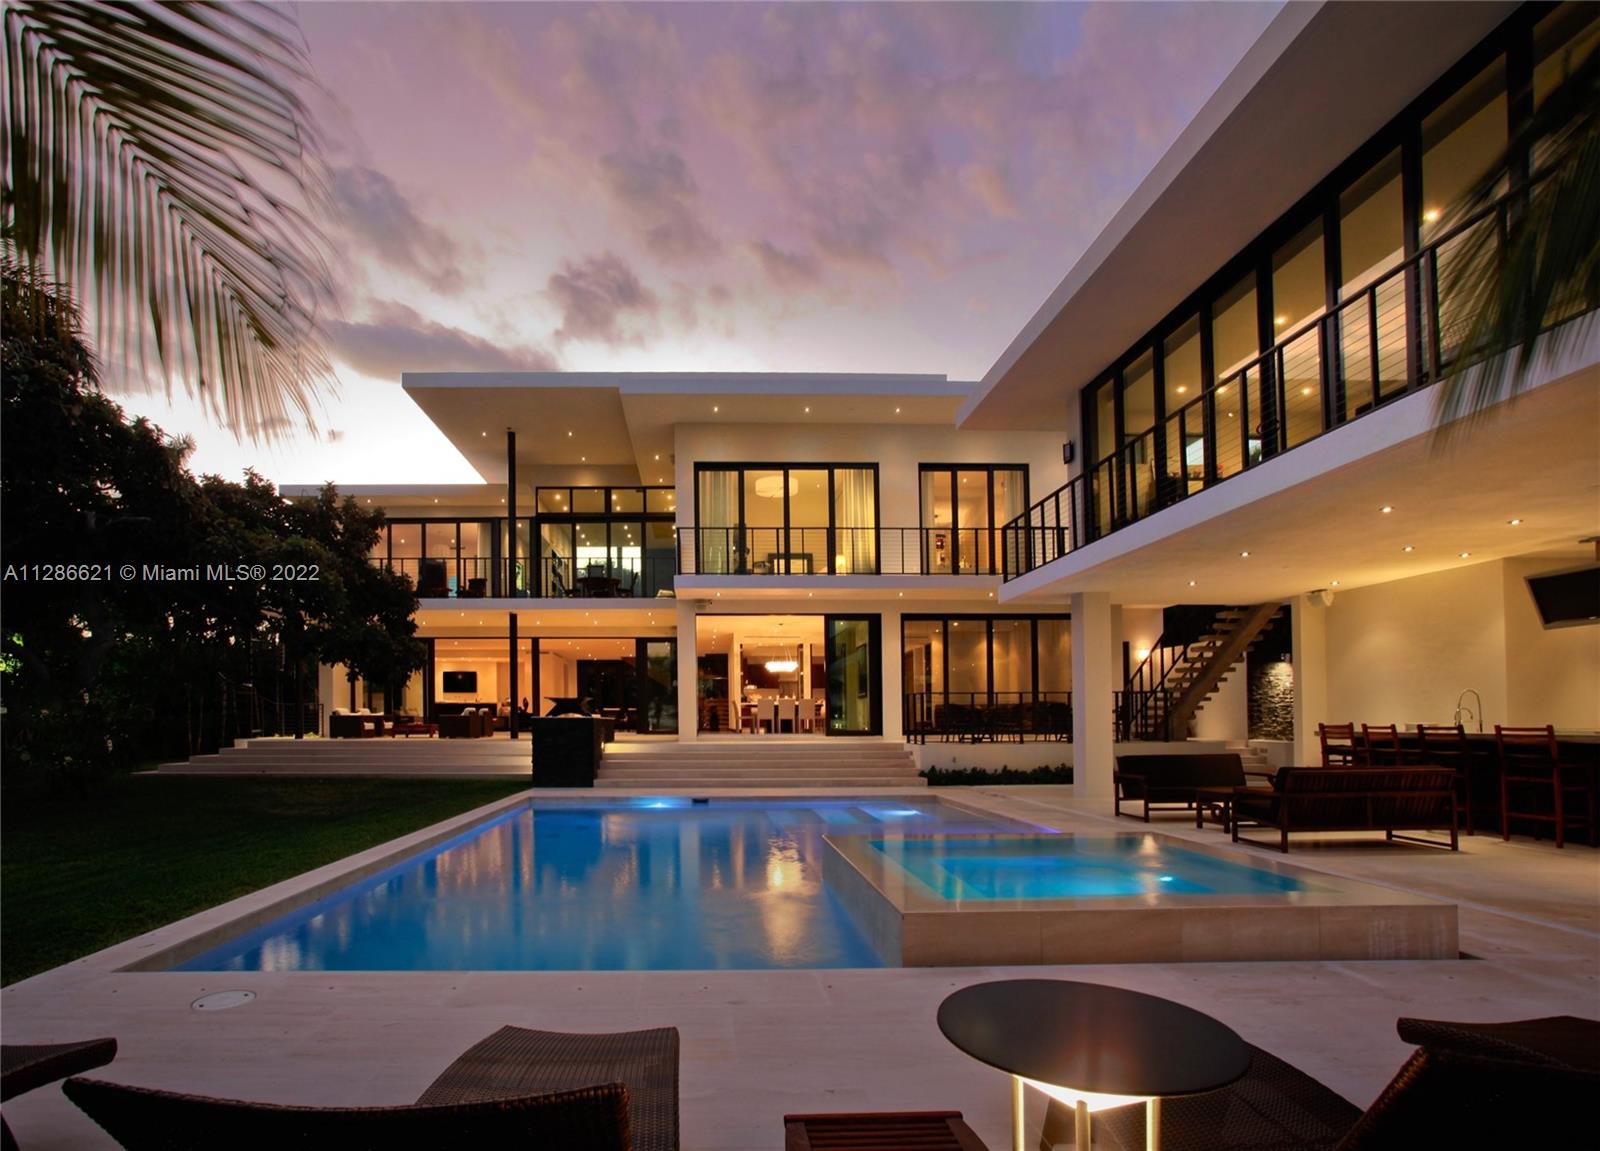 Largest Tropical Modern home on largest wide-bay (double) lot available on the Venetian Islands offers movie-set glamour on a half-acre waterfront stage.The Ralph Choeff-designed resort-style residence commands dramatic South Beach vistas along 120 waterfront feet. Featured in Florida Design Magazine, the stunning 9,000sf house on a 21,000sf lot boasts poured concrete construction, impact glass doors/walls, limestone floors, balconies & terraces. Grand Master w/His & Hers baths/walk-ins. Gourmet kitchen, upstairs family & home office. Southeast breezes make for idyllic indoor/outdoor living w/pool, spa, cabana/guest house, summer kitchen/lounge, generator, dockage for 3 boats +2 lifts, no bridges to bay.Walk to Sunset Harbor/Lincoln Rd, bike to Ocean Drive, 10min drive to Downtown/Brickell